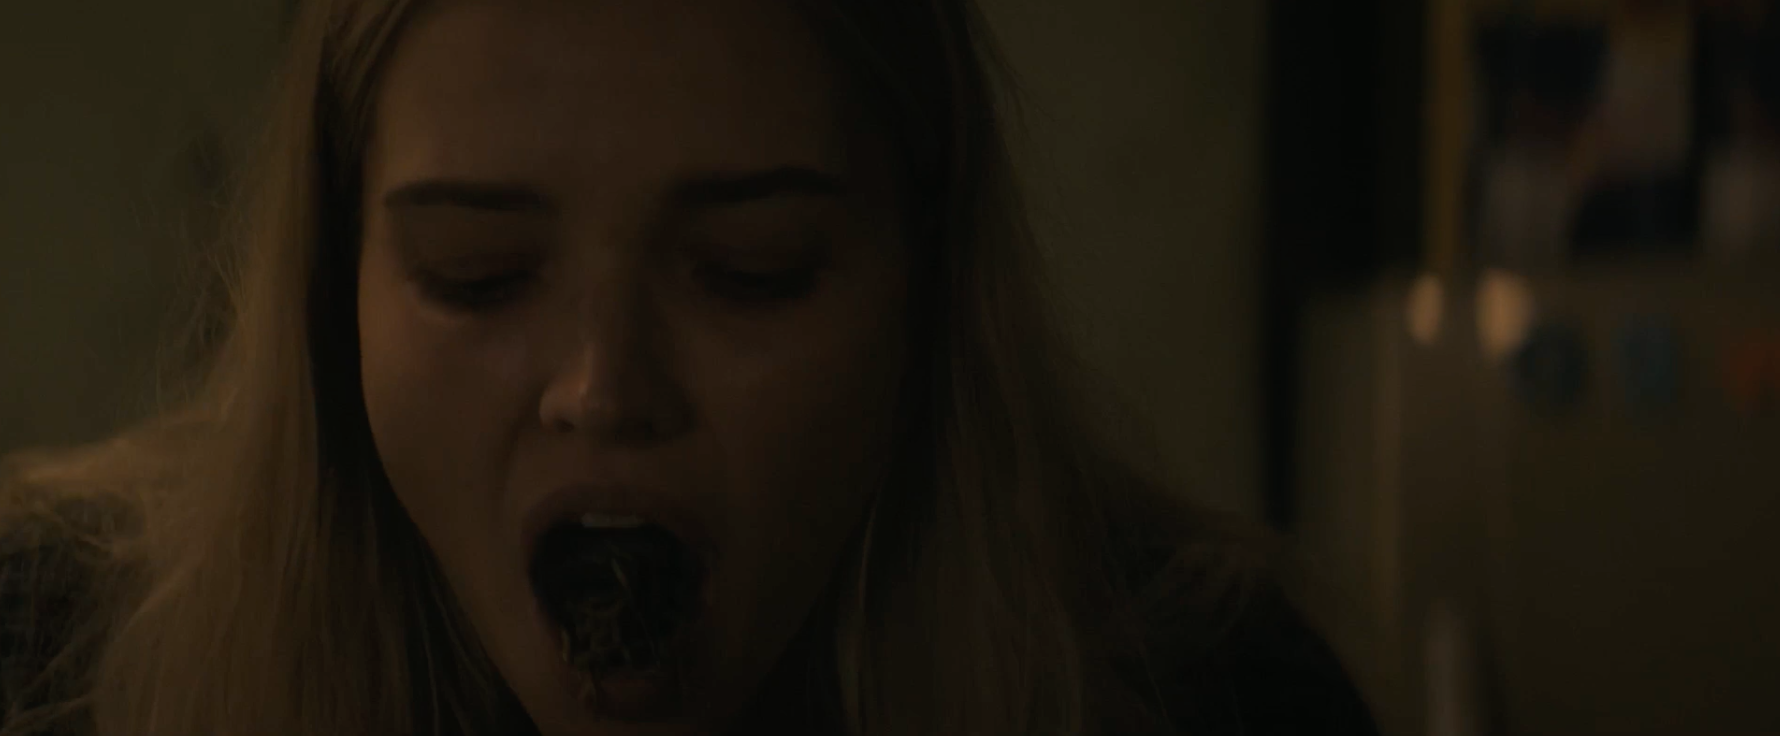 Close-up of a person with long hair eating food in a dimly lit room